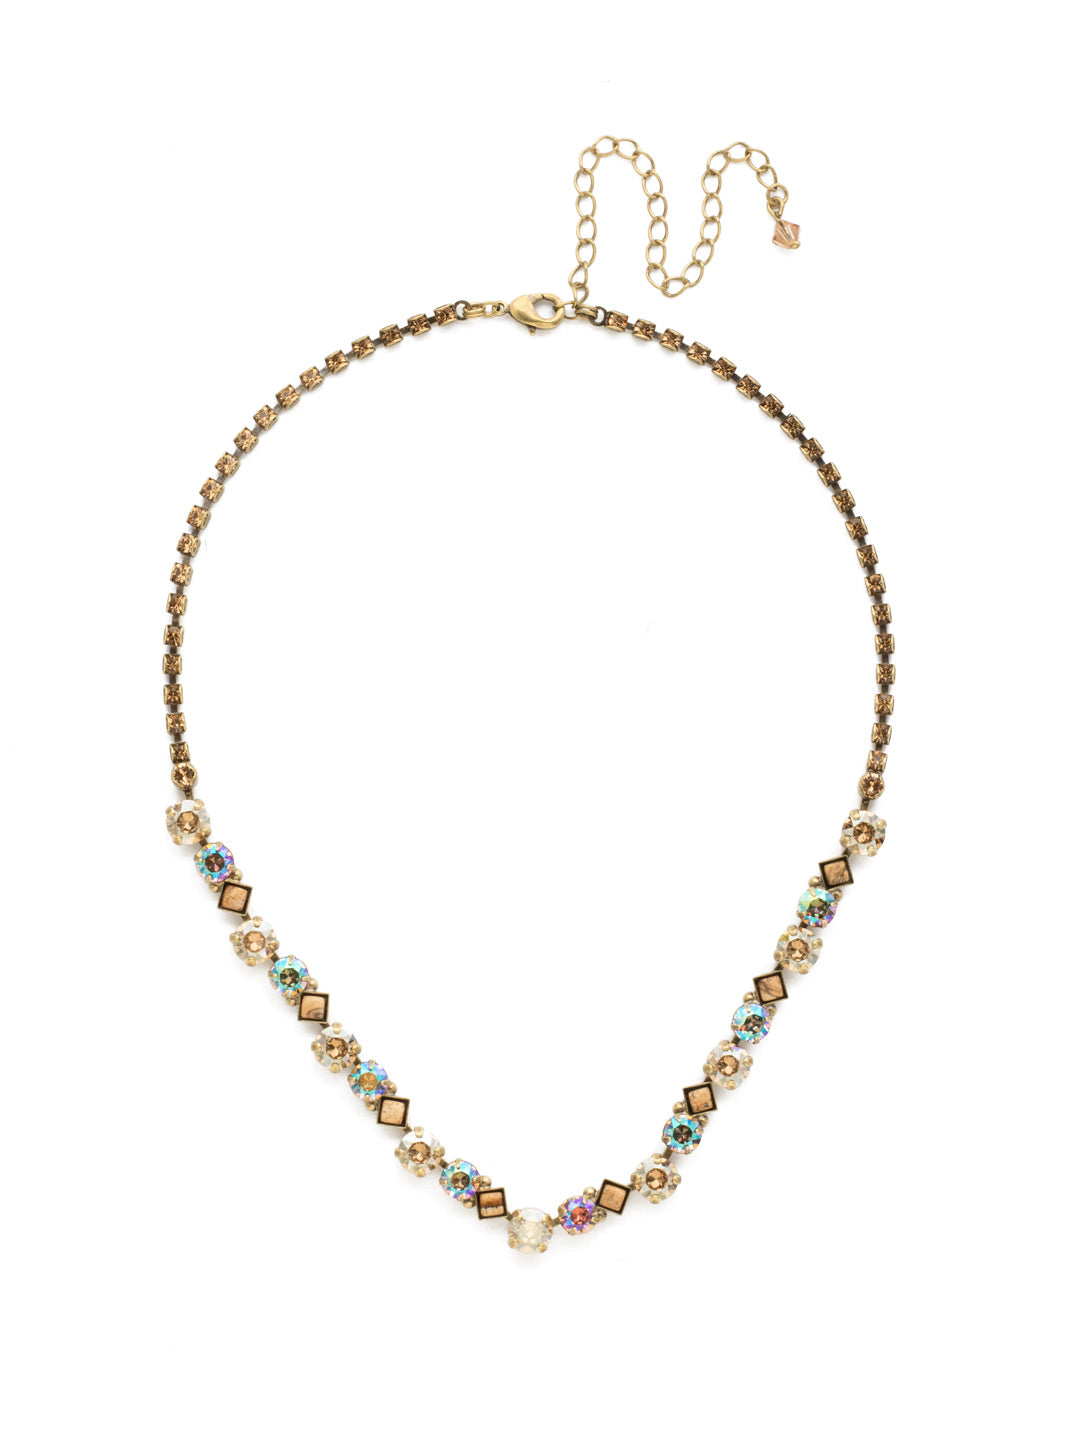 Dazzling Diamonds Line Necklace - NDN36AGNT - <p>Diamond-shaped semiprecious stones are accented by shimmering, round crystals in this classic necklace. From Sorrelli's Neutral Territory collection in our Antique Gold-tone finish.</p>